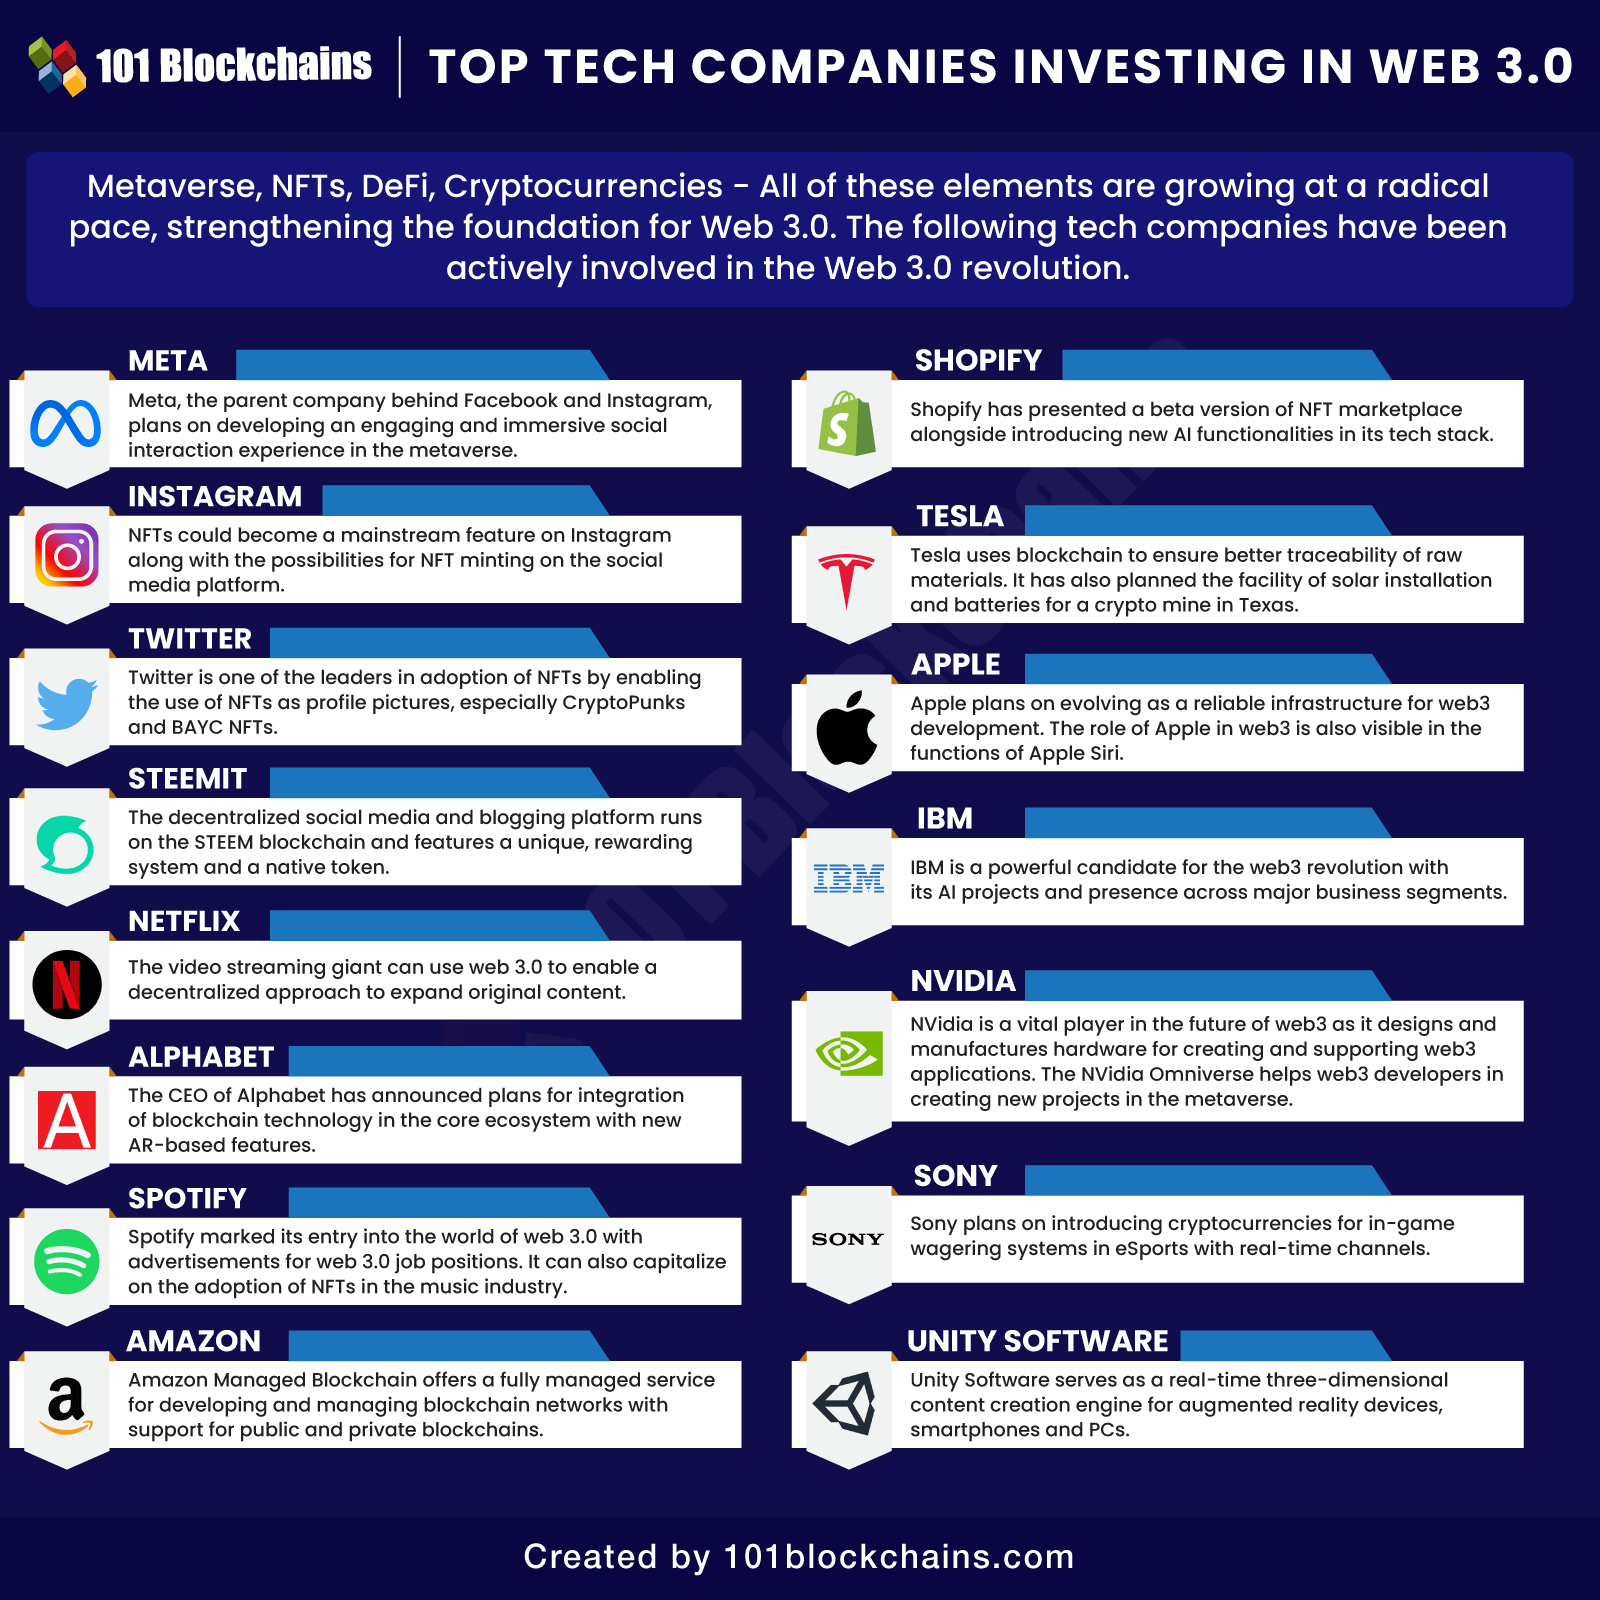 Top Tech Companies Investing in Web 3.0